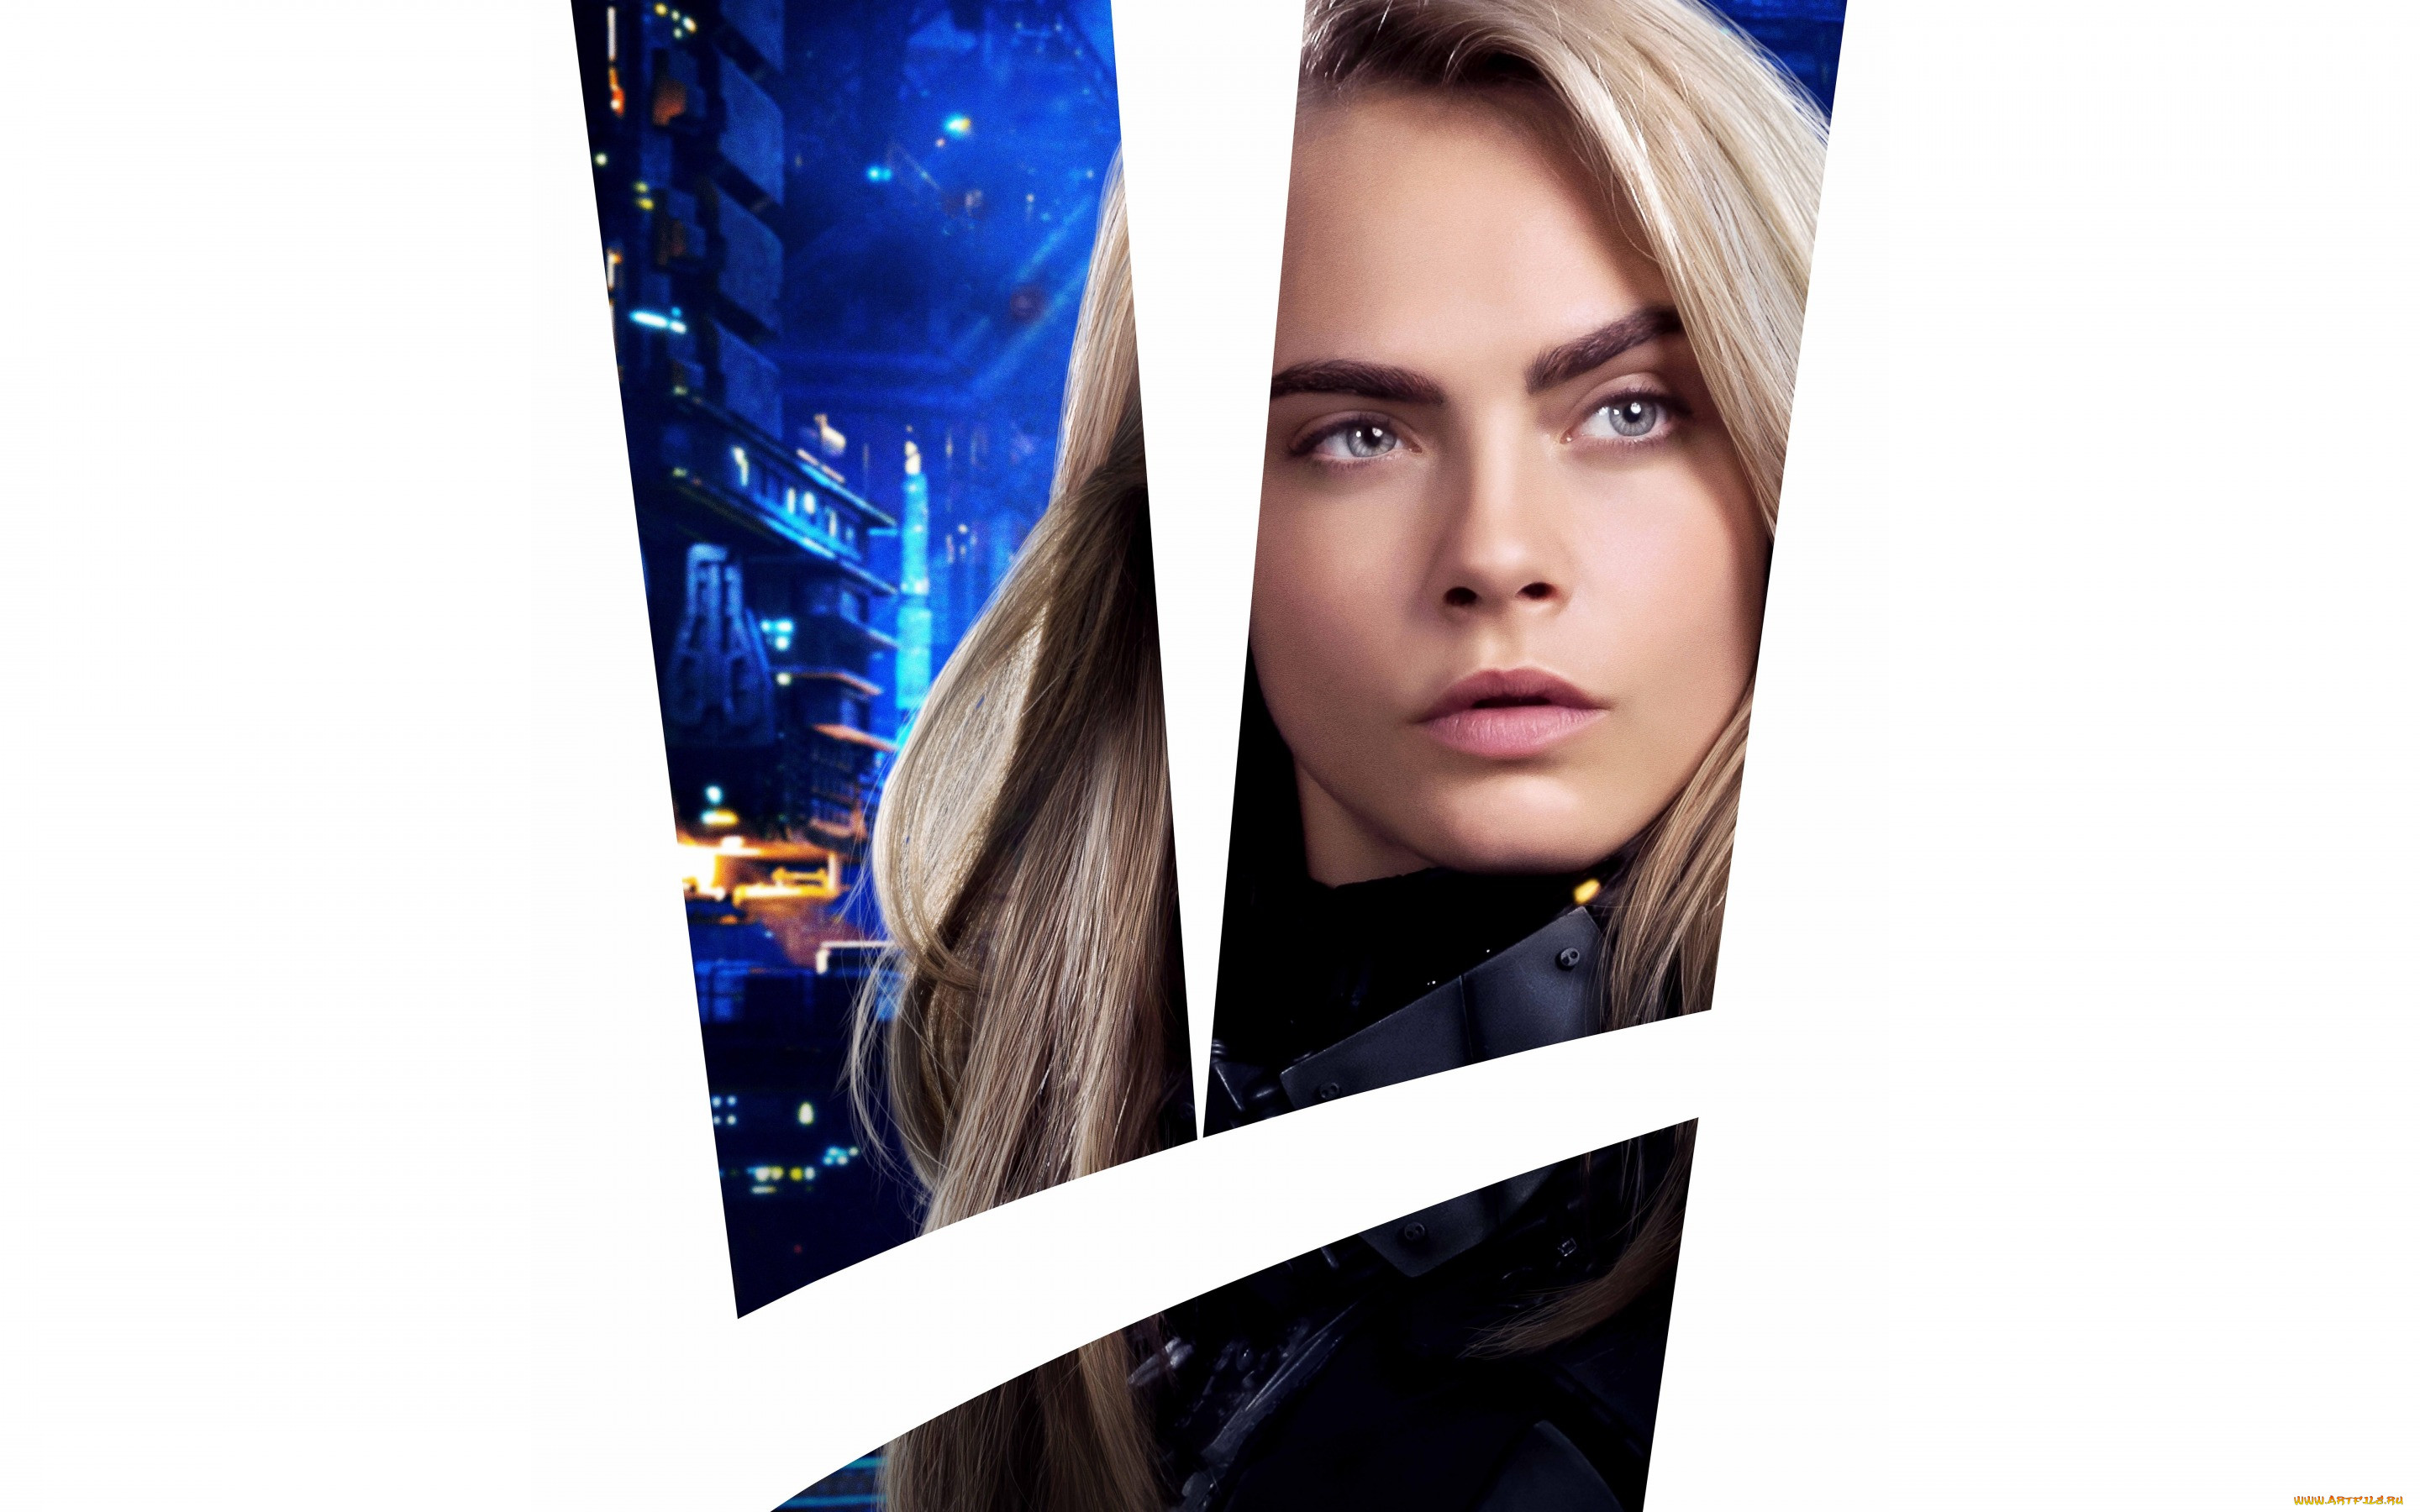  , valerian and the city of a thousand planets, valerian